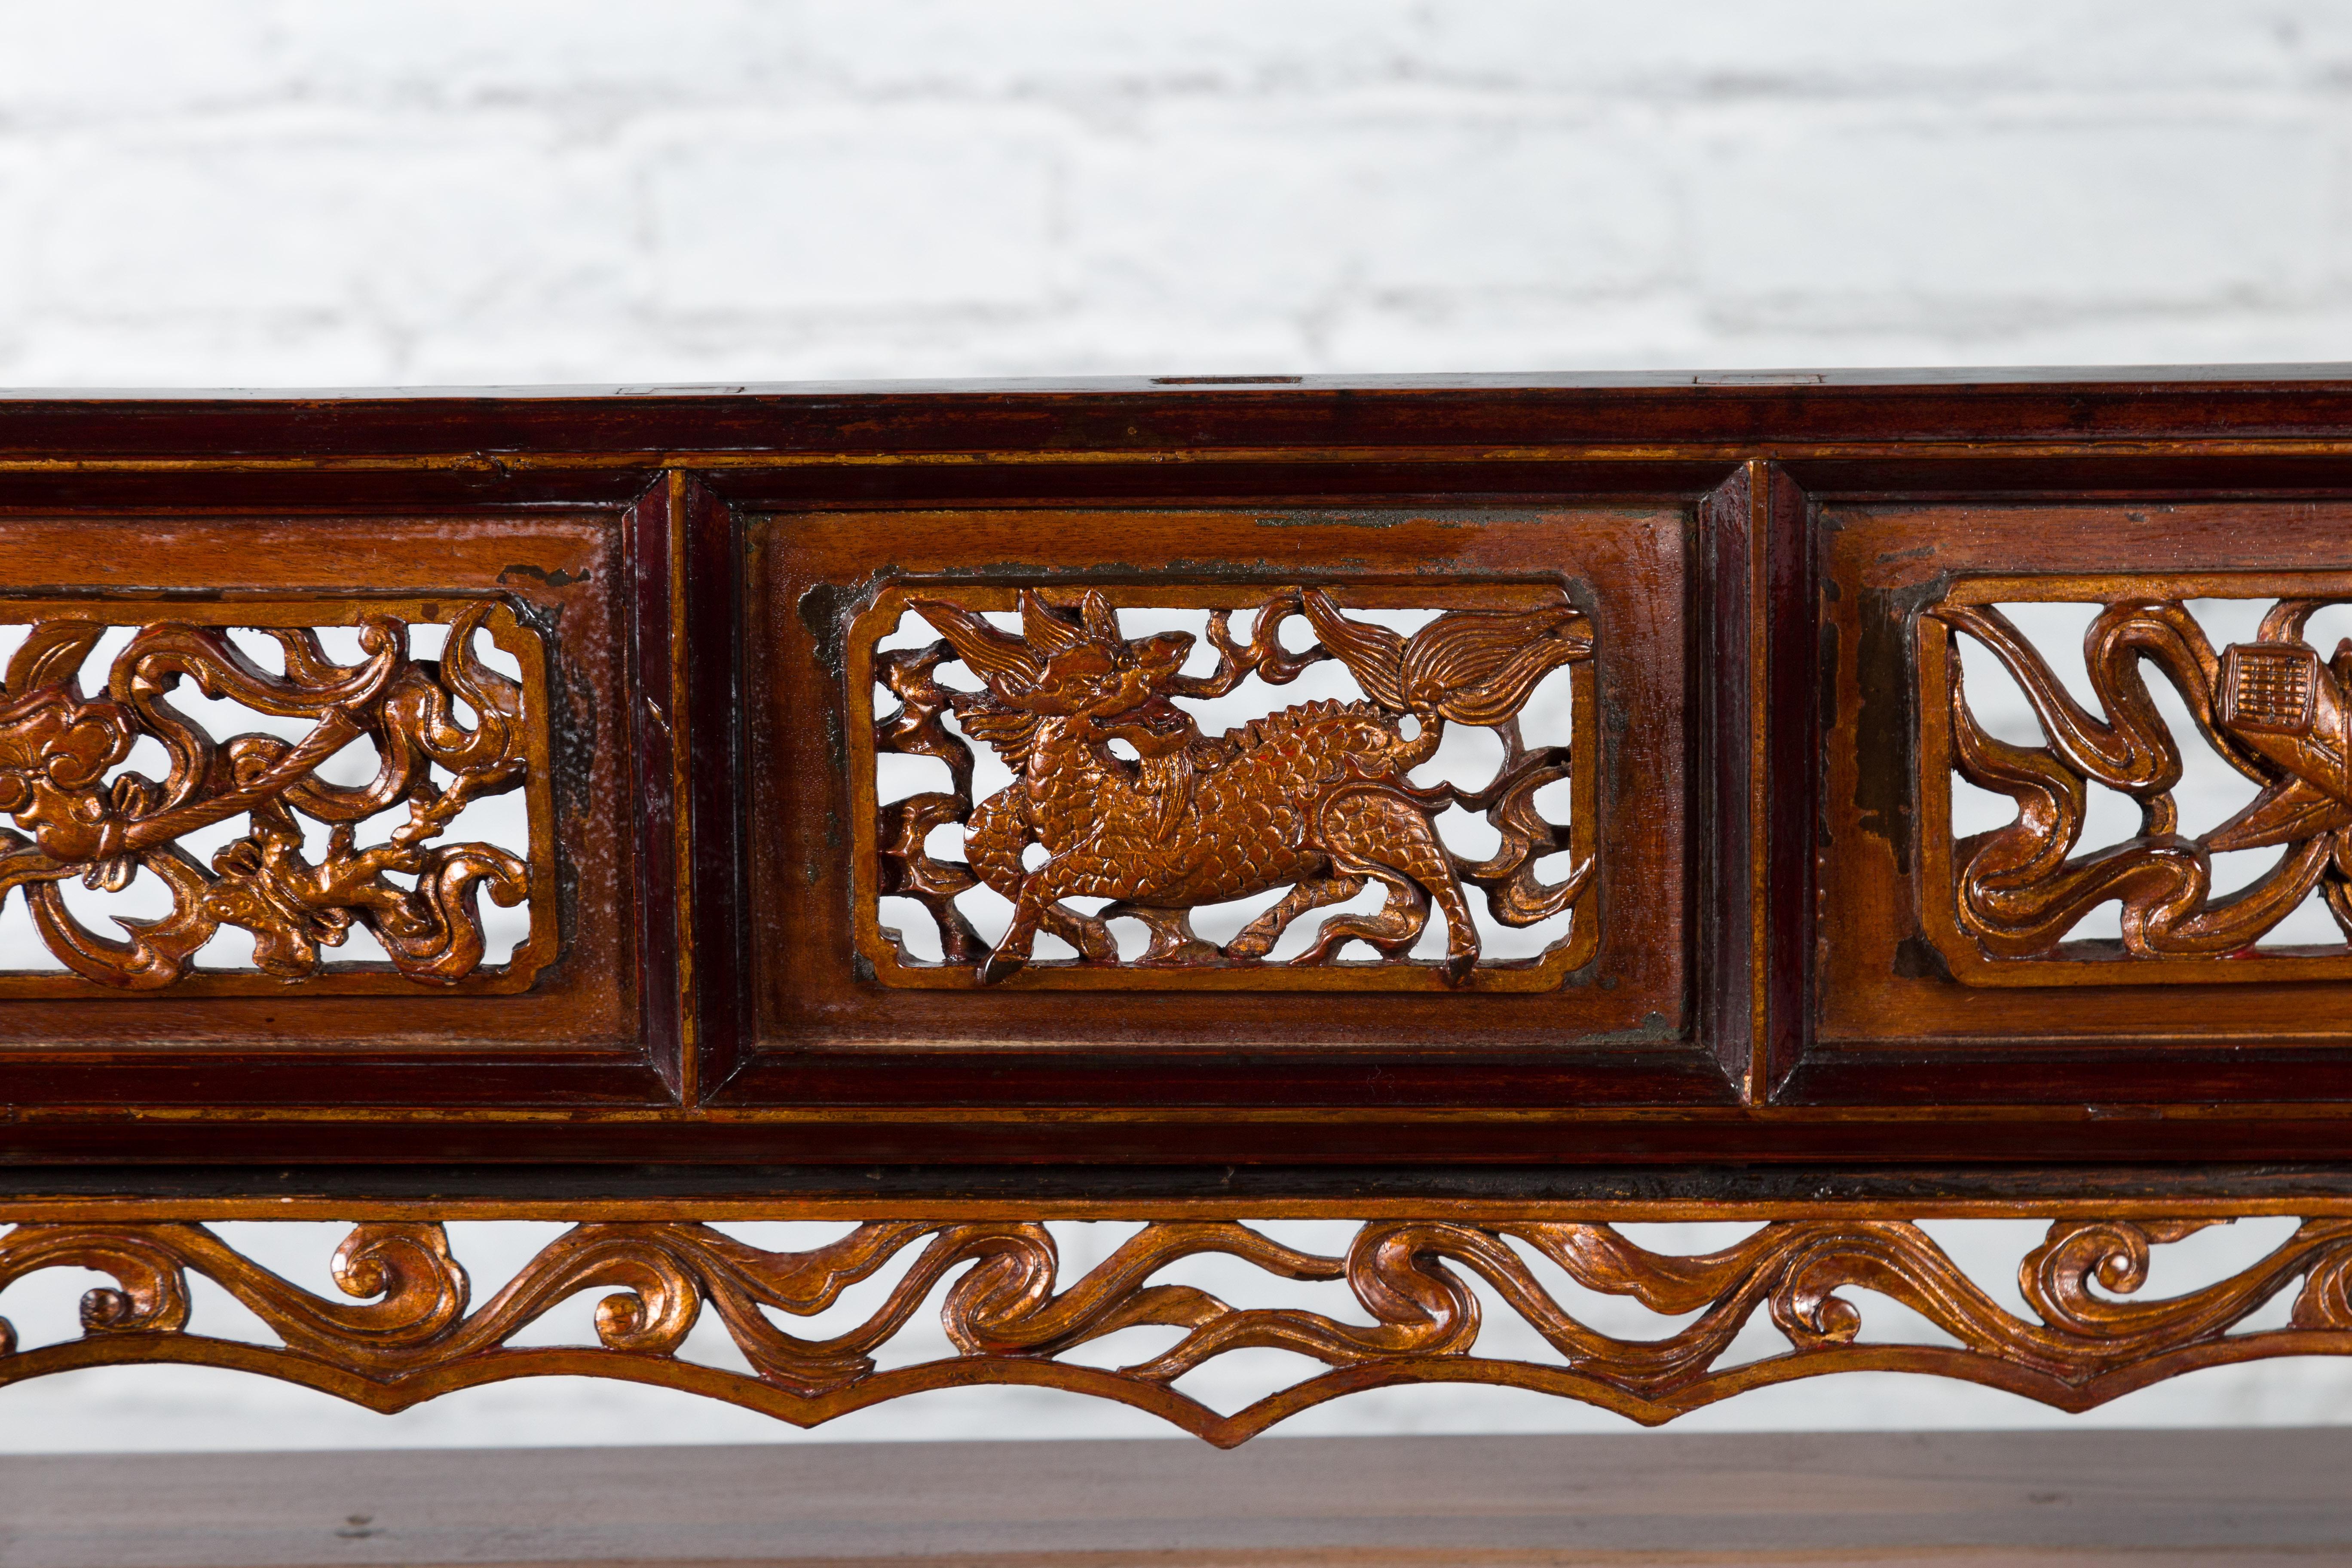 Chinese Qing Dynasty 18th Century Mirror Frame with Hand-Carved Mythical Motifs 1